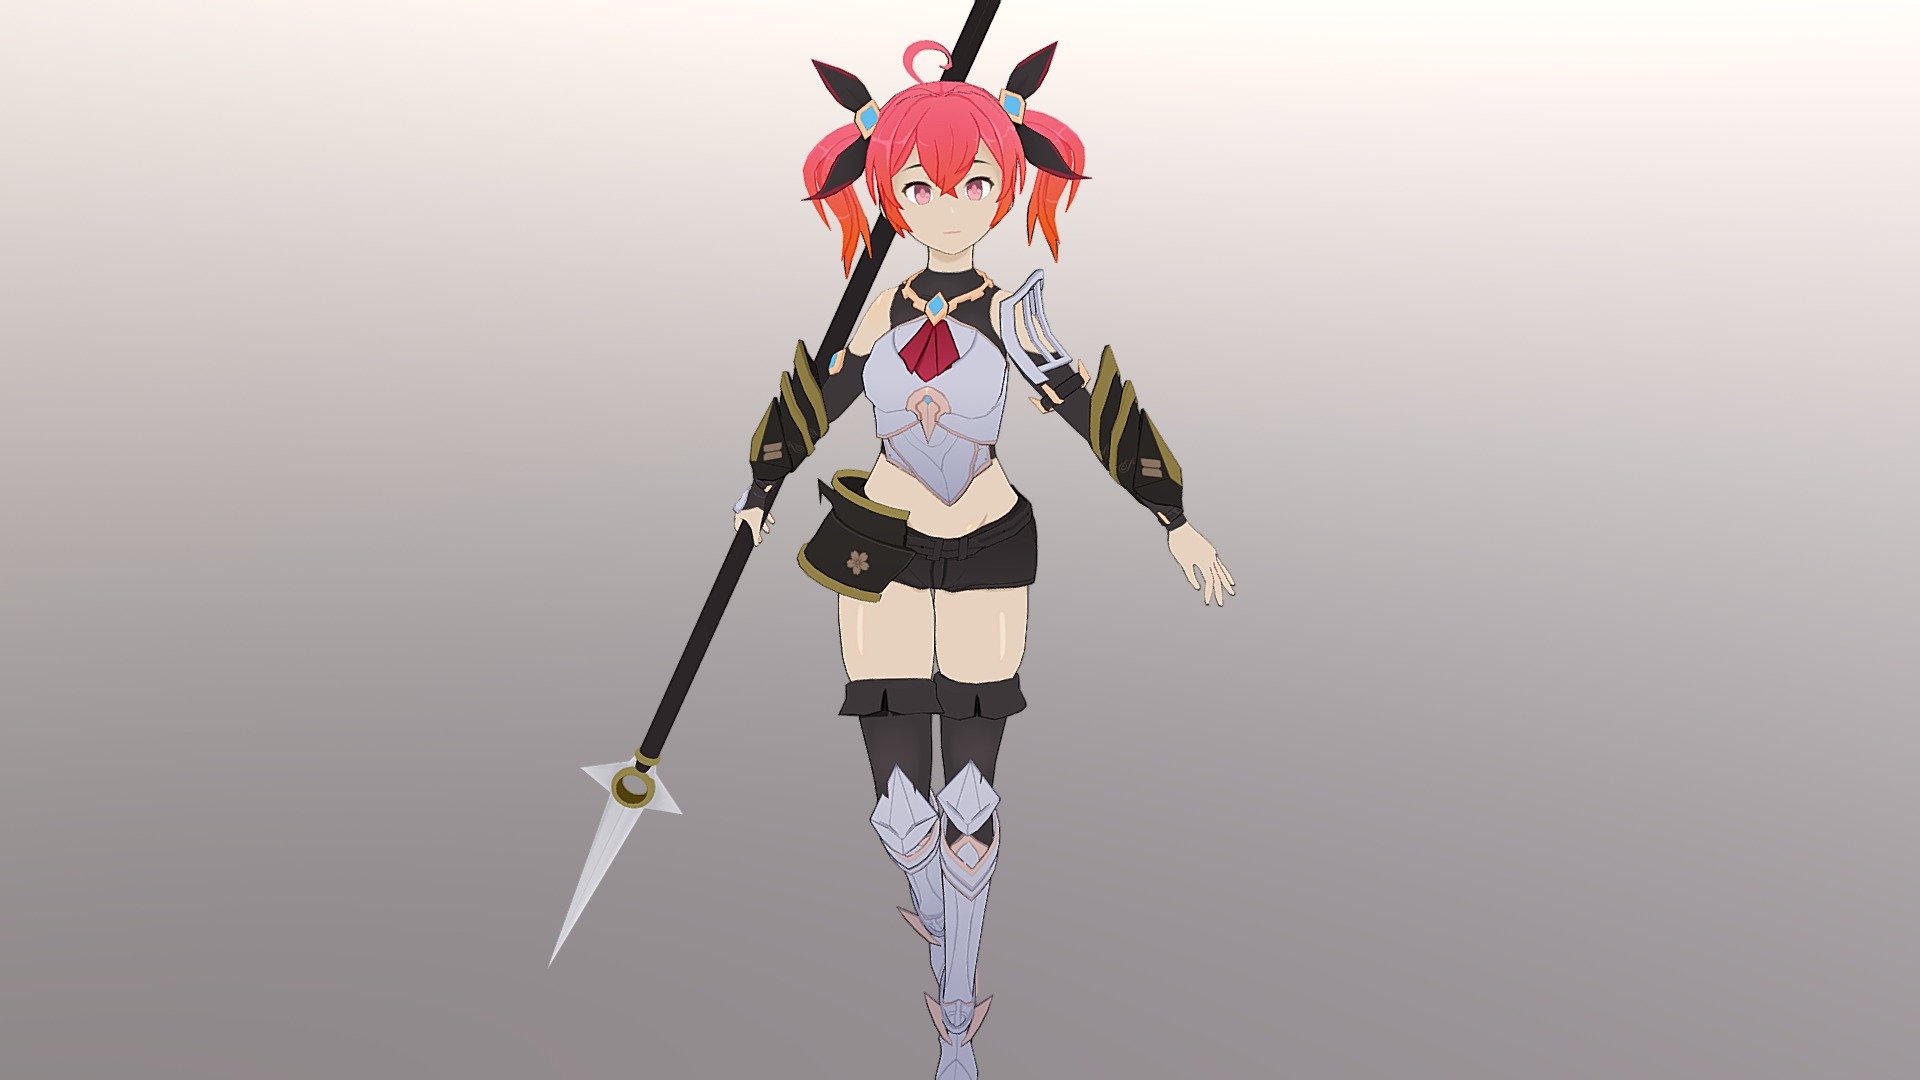 Anime Style knight - Anime Knight - 3D model by OneWayRoad 3d model